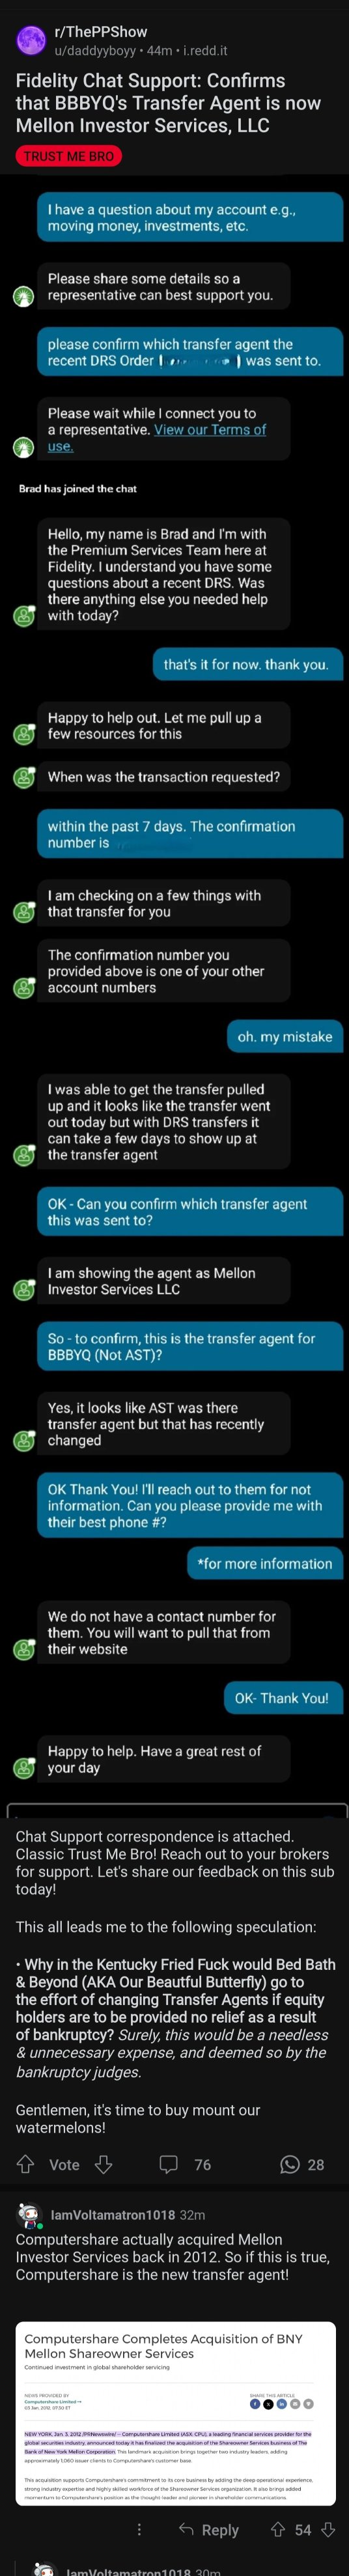 Why change to new transfer agent if the shares are going to be worthless?